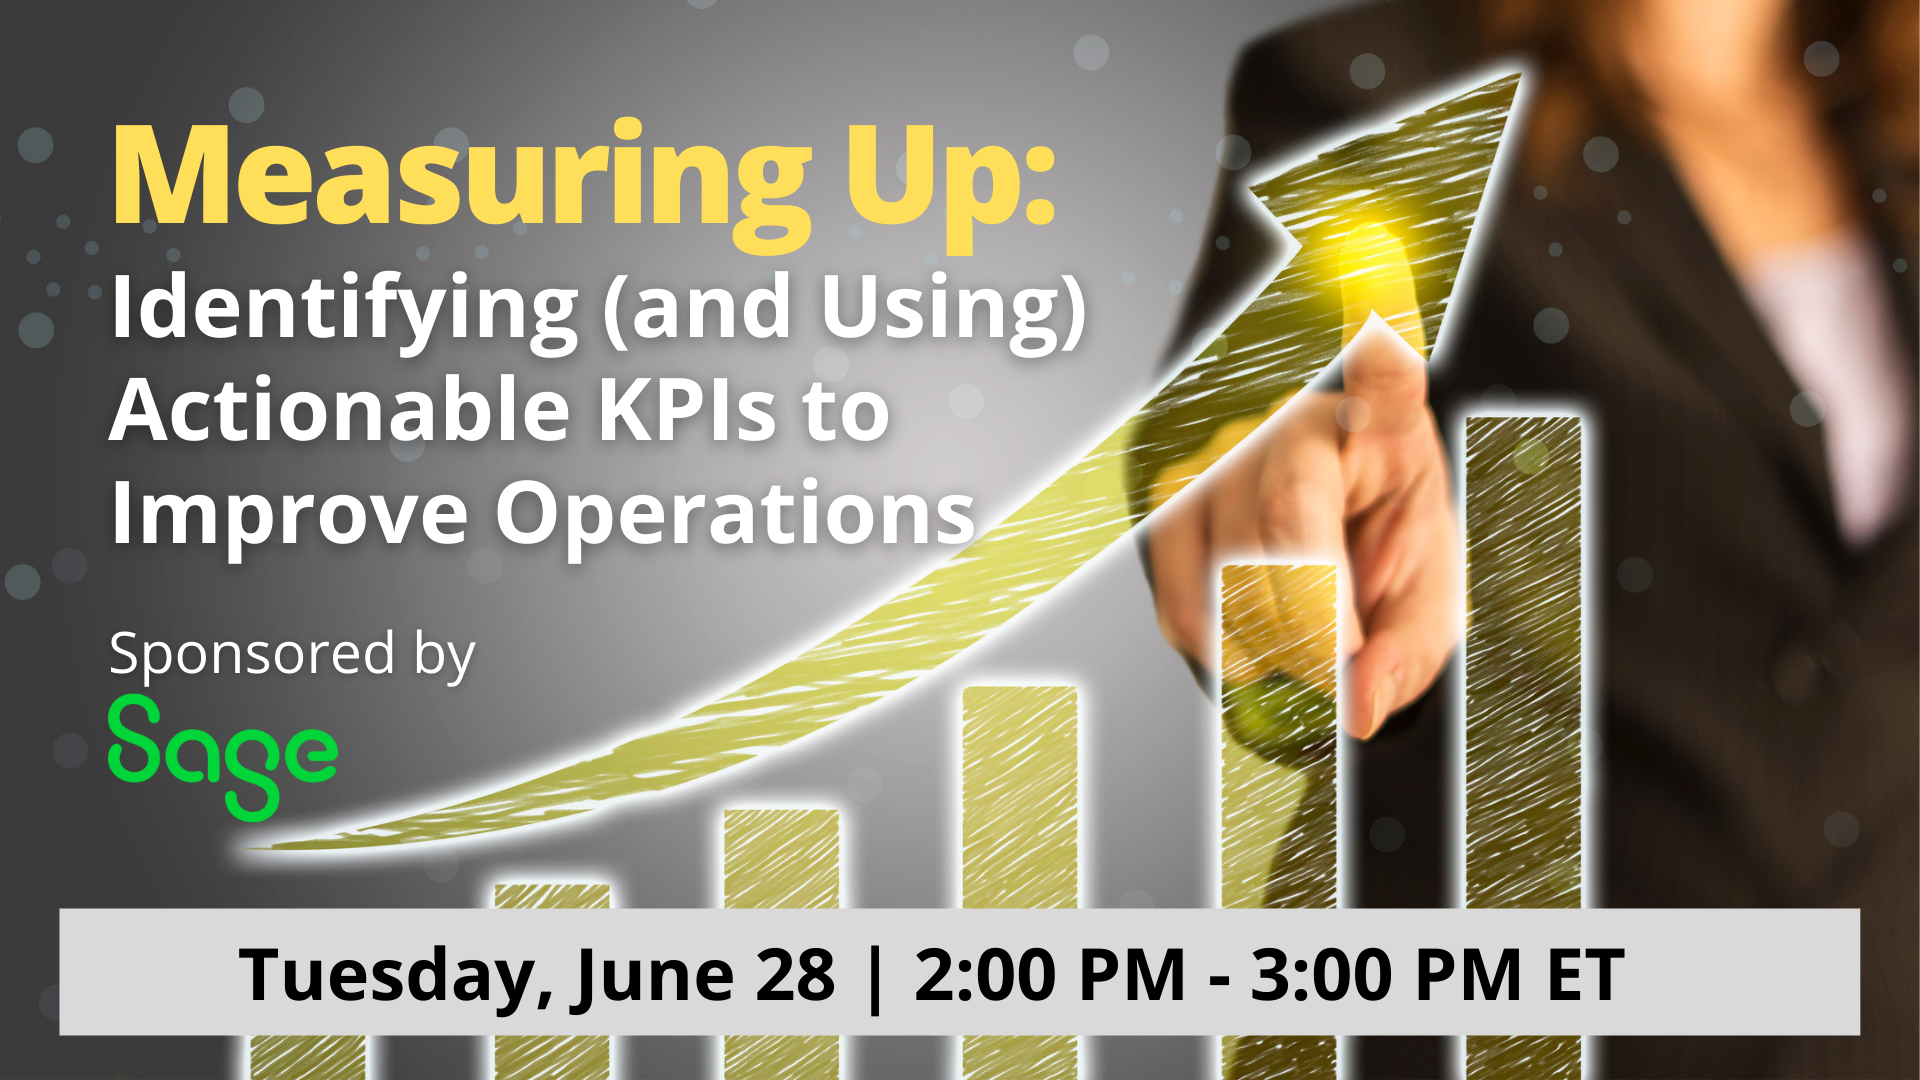 Webinar: Measuring Up - Identifying (and Using) Actionable KPIs to Improve Operations